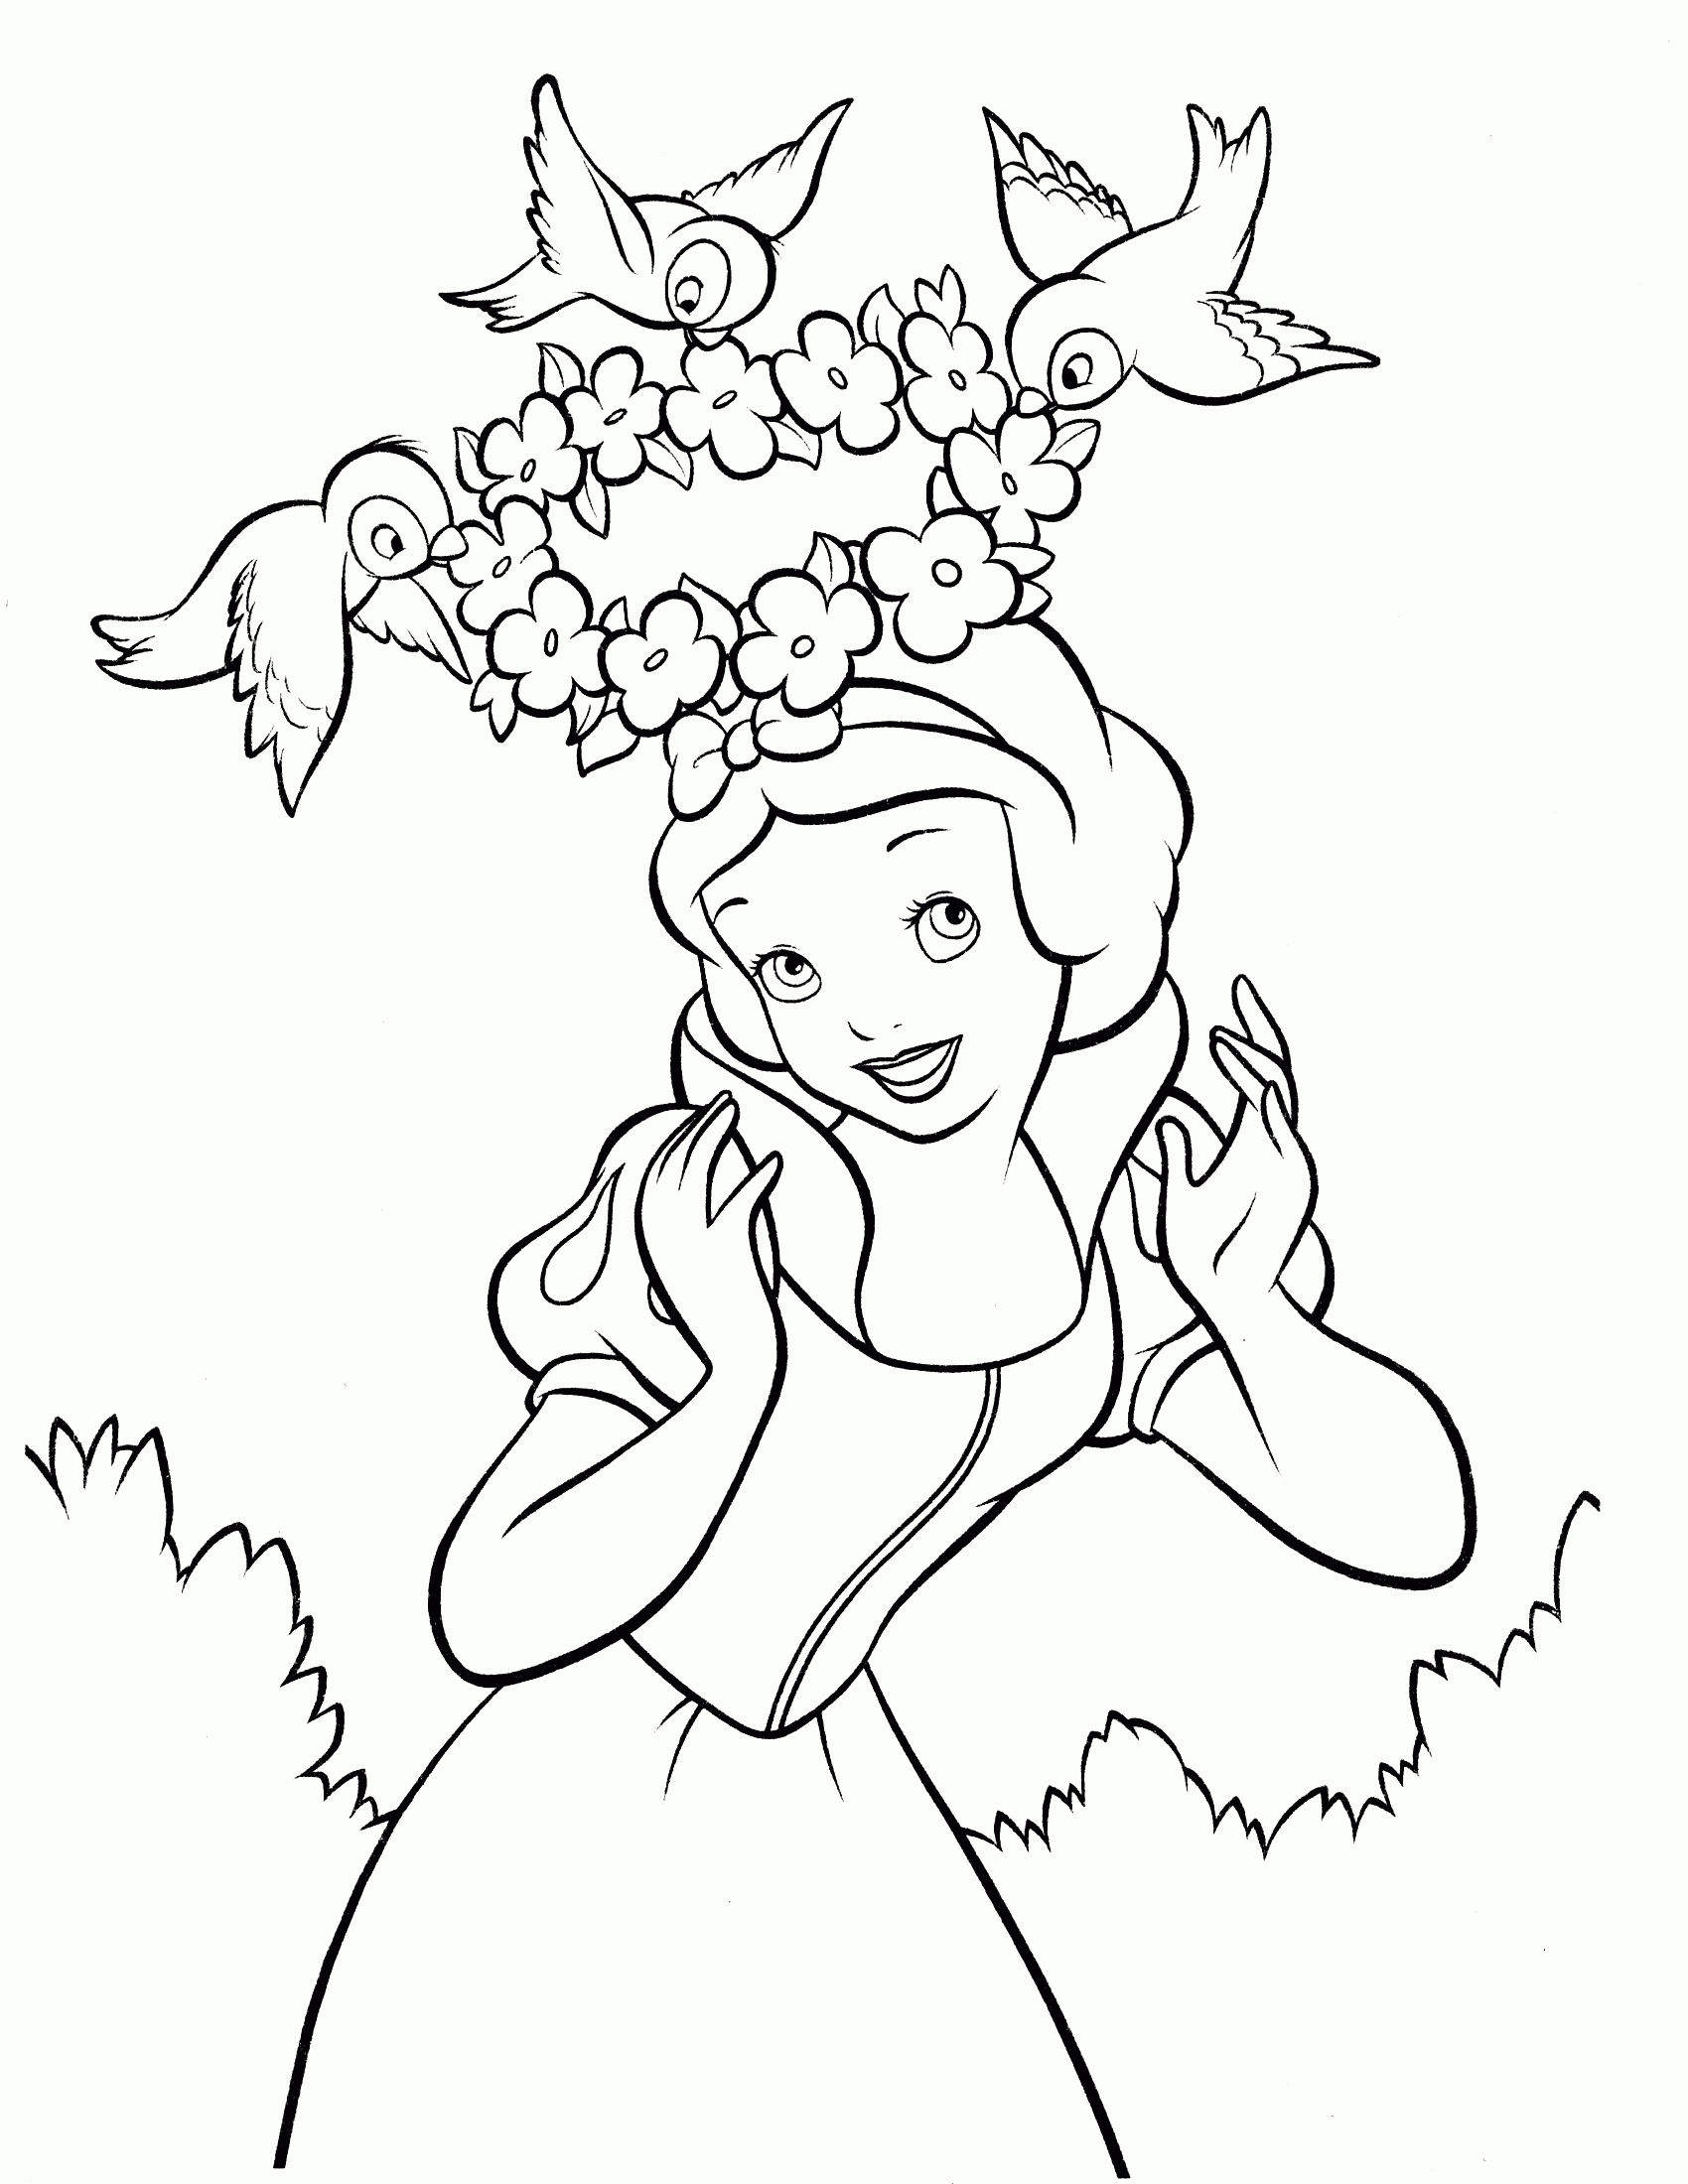 Disney Princess Coloring Pages Snow White   Coloring Home